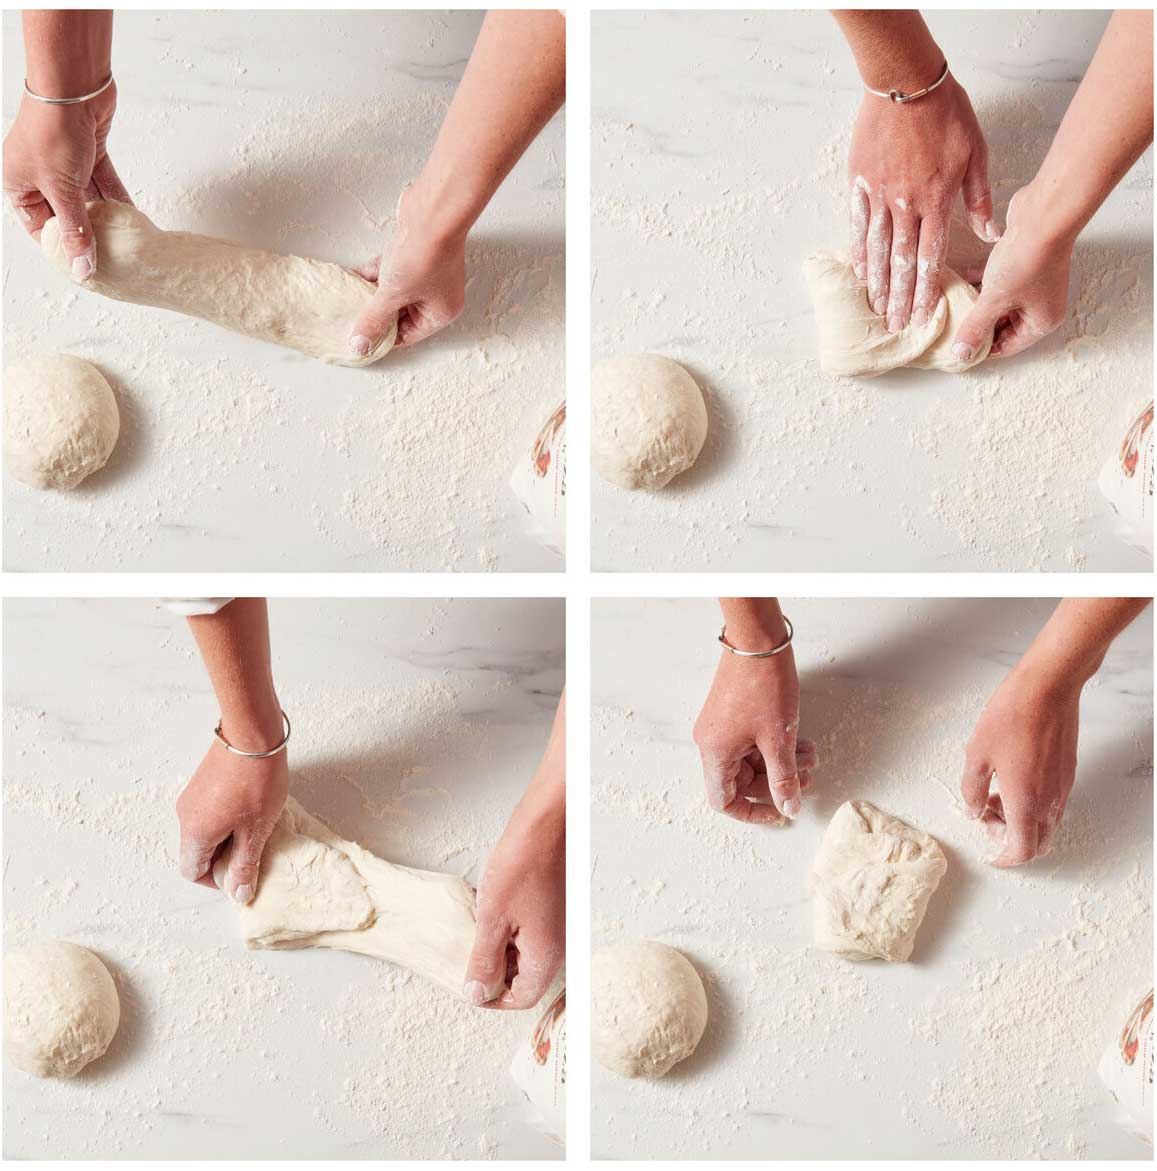 Four photos showing the dough being stretched and folded